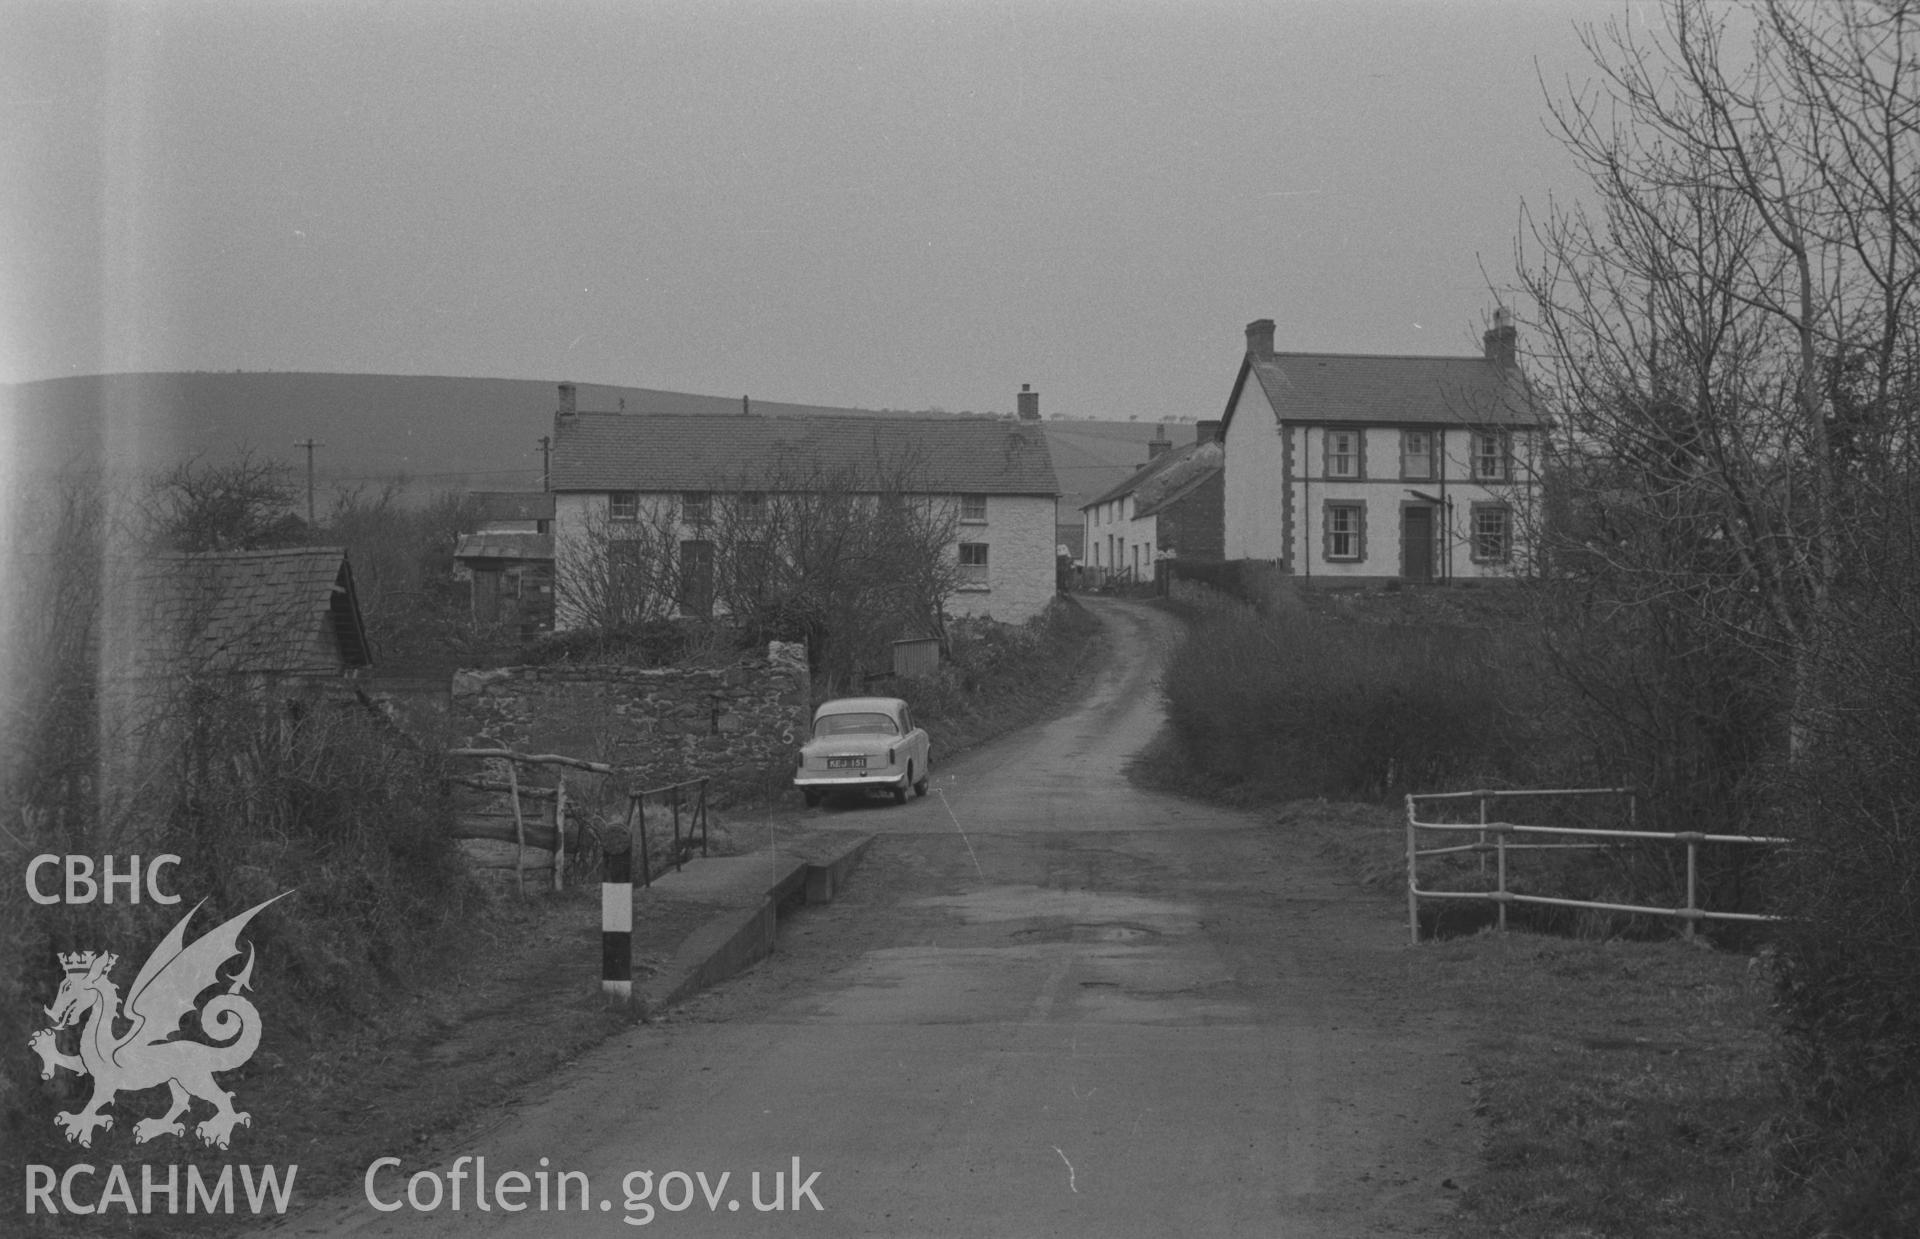 Black and White photograph showing view of Penrhyncoch village from the ford across Nant Silo on the lane to Llwyn-Gronw. Photographed by Arthur Chater in April 1962 at Grid Reference SN 642 839, looking north.